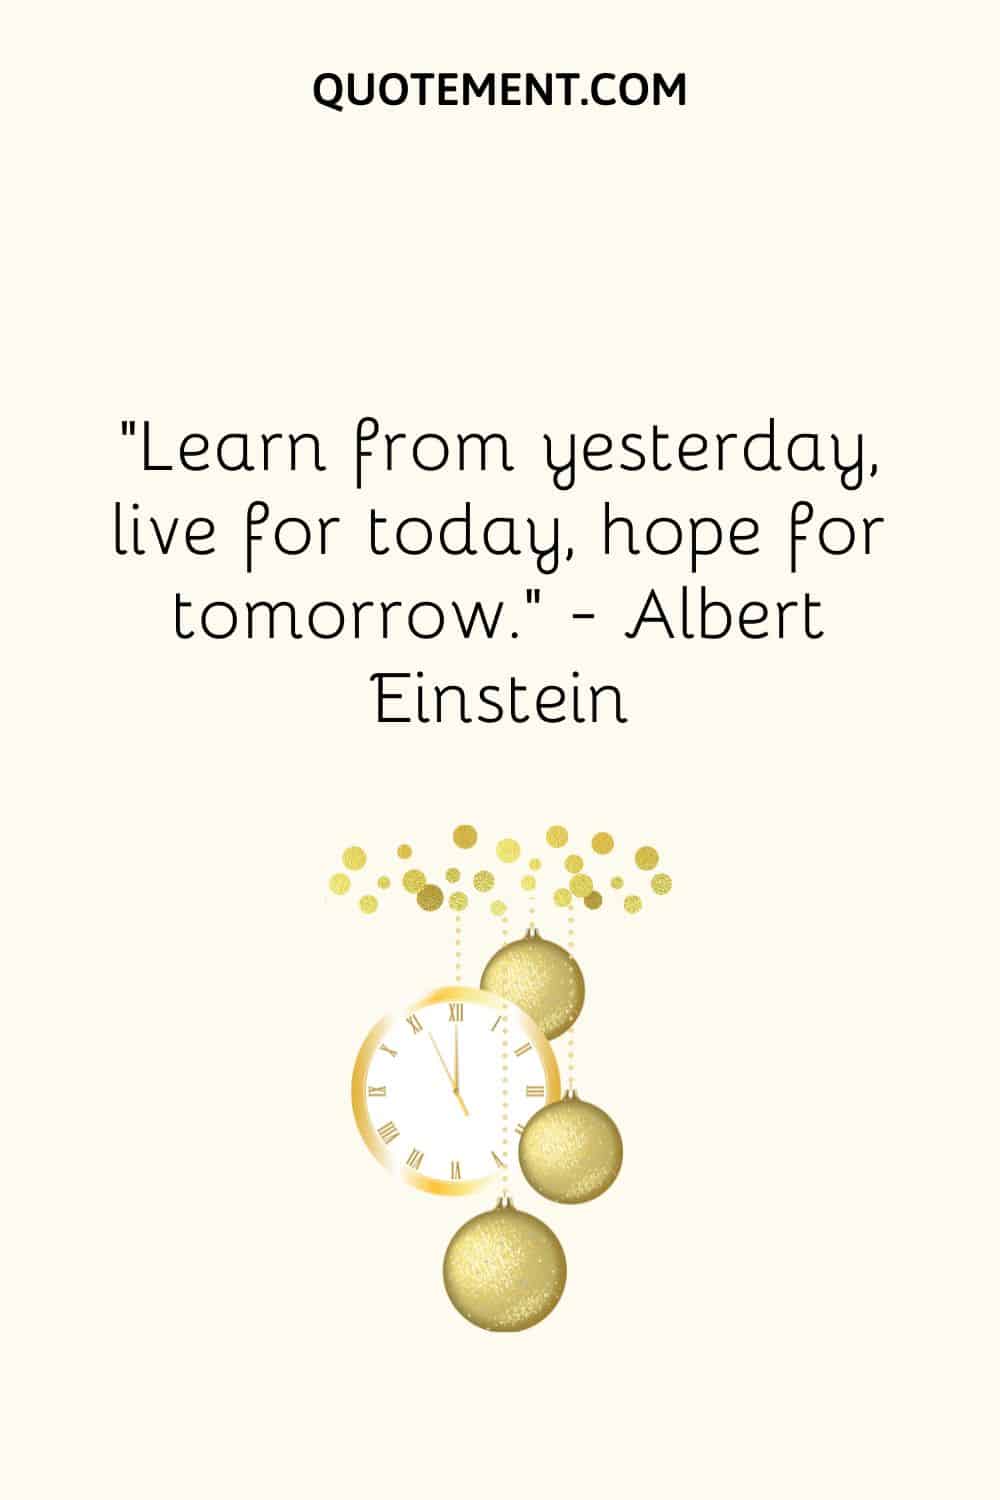 “Learn from yesterday, live for today, hope for tomorrow.” ― Albert Einstein